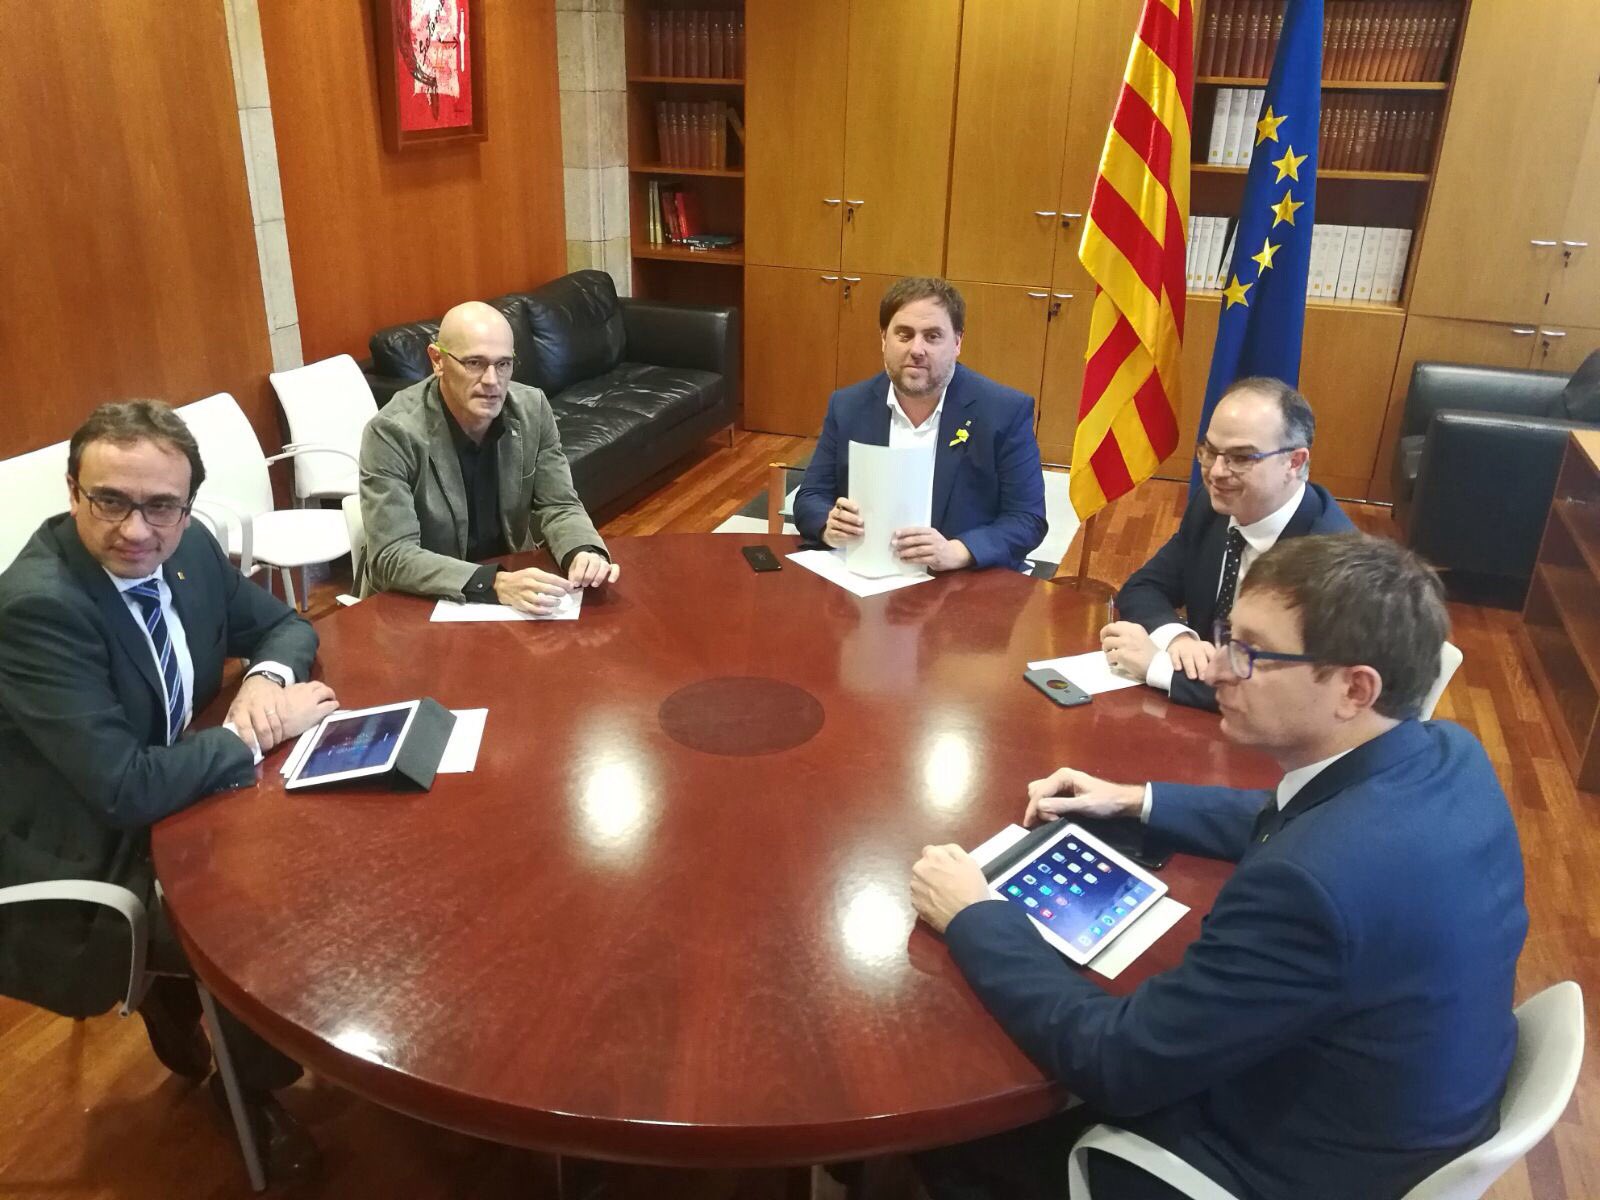 Dismissed vice-president and members of the government Oriol Junqueras, Jordi Turull, Josep Rull, Carles Mundó and Raül Romeva Oct 31 (by ACN)